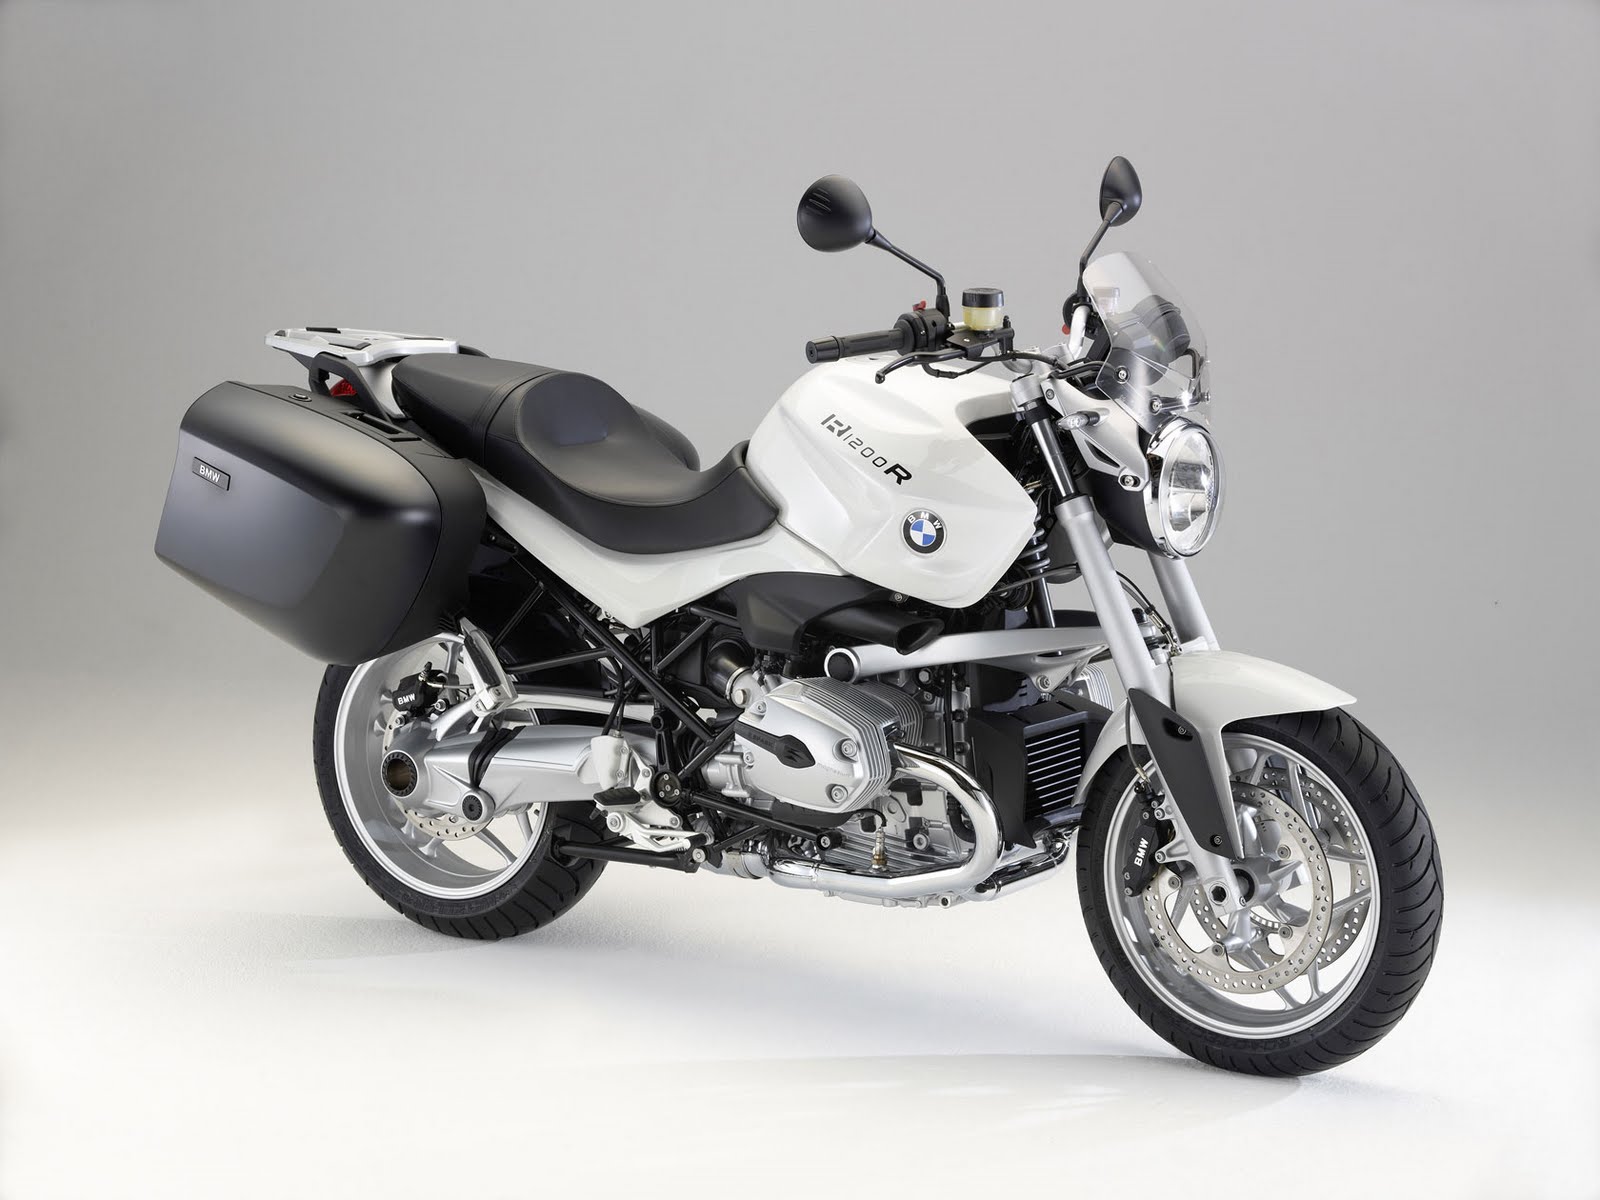 ... substantial long-distance travel, the R1200R Touring Edition features